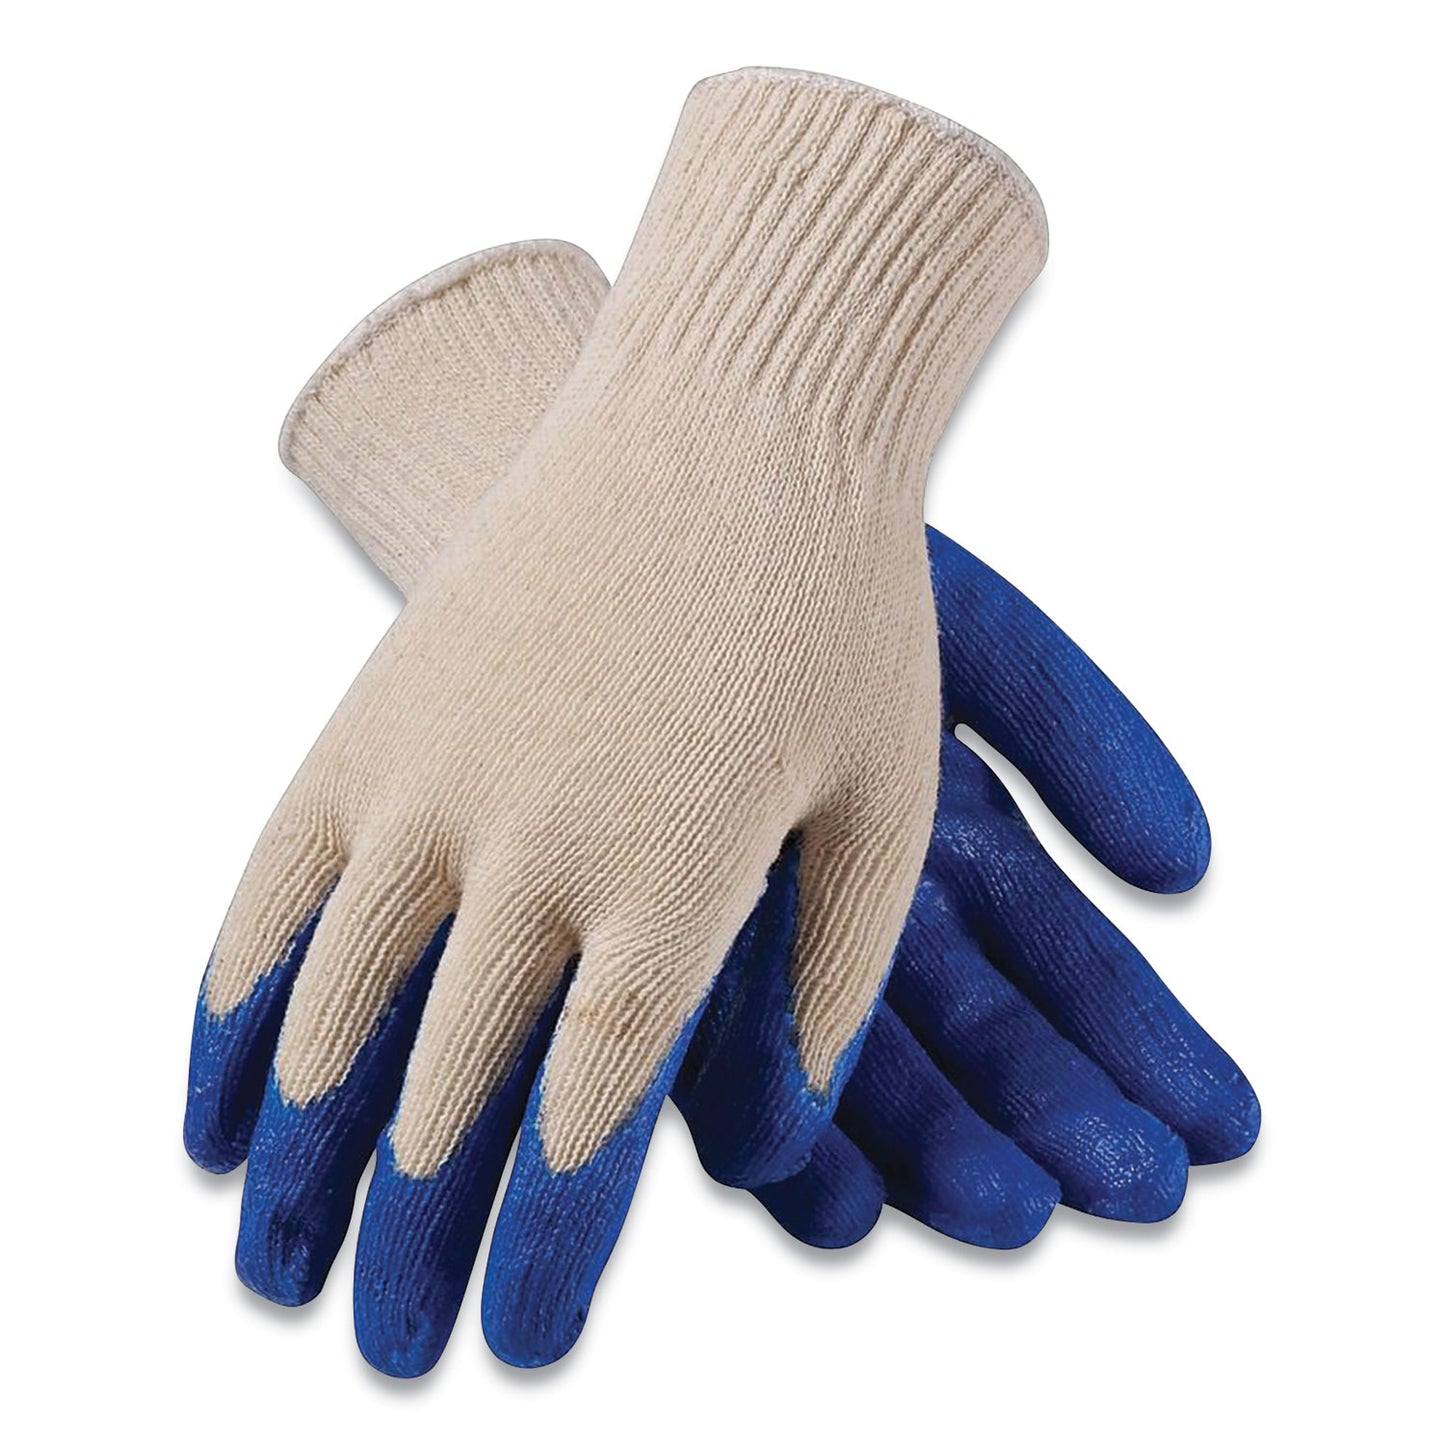 Seamless Knit Cotton/polyester Gloves, Regular Grade, Small, Natural/blue, 12 Pairs